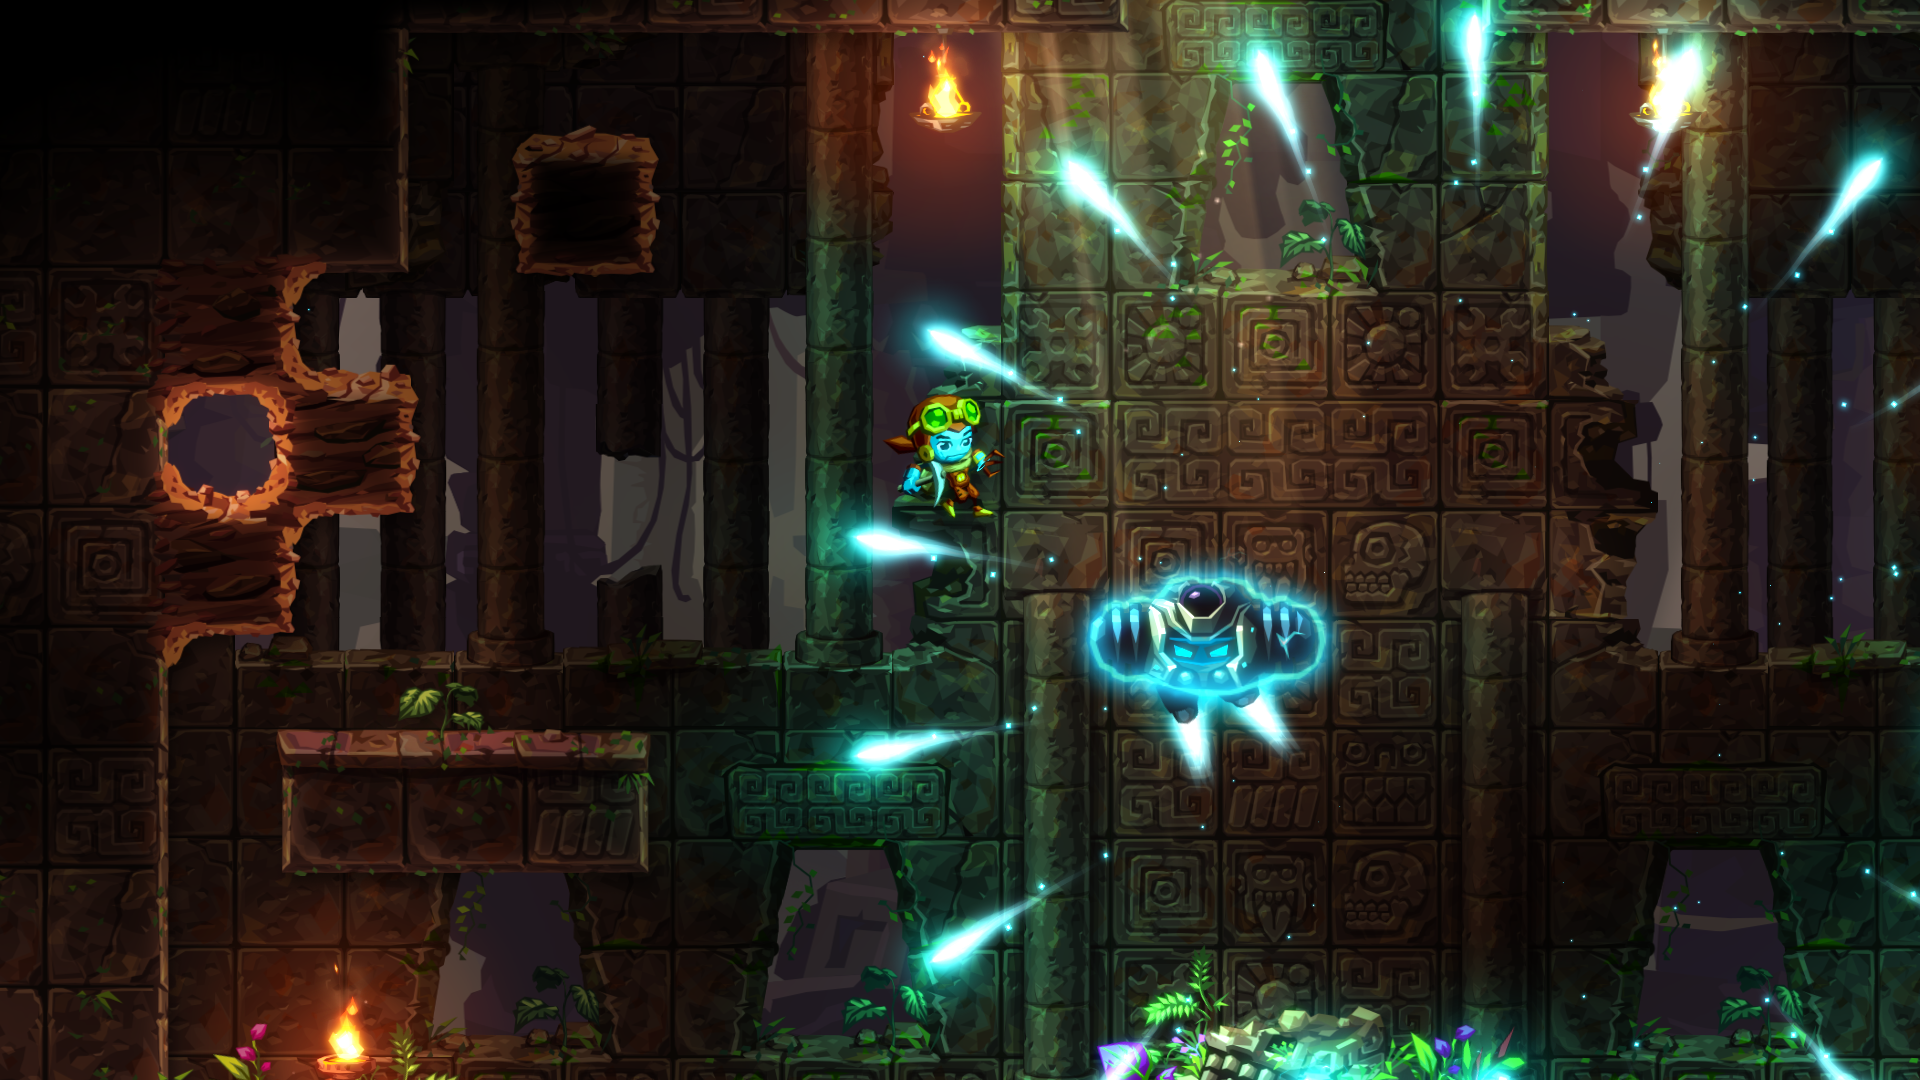 HD wallpaper from SteamWorld Dig 2 showing a robot character mining in an intricate underground cavern.